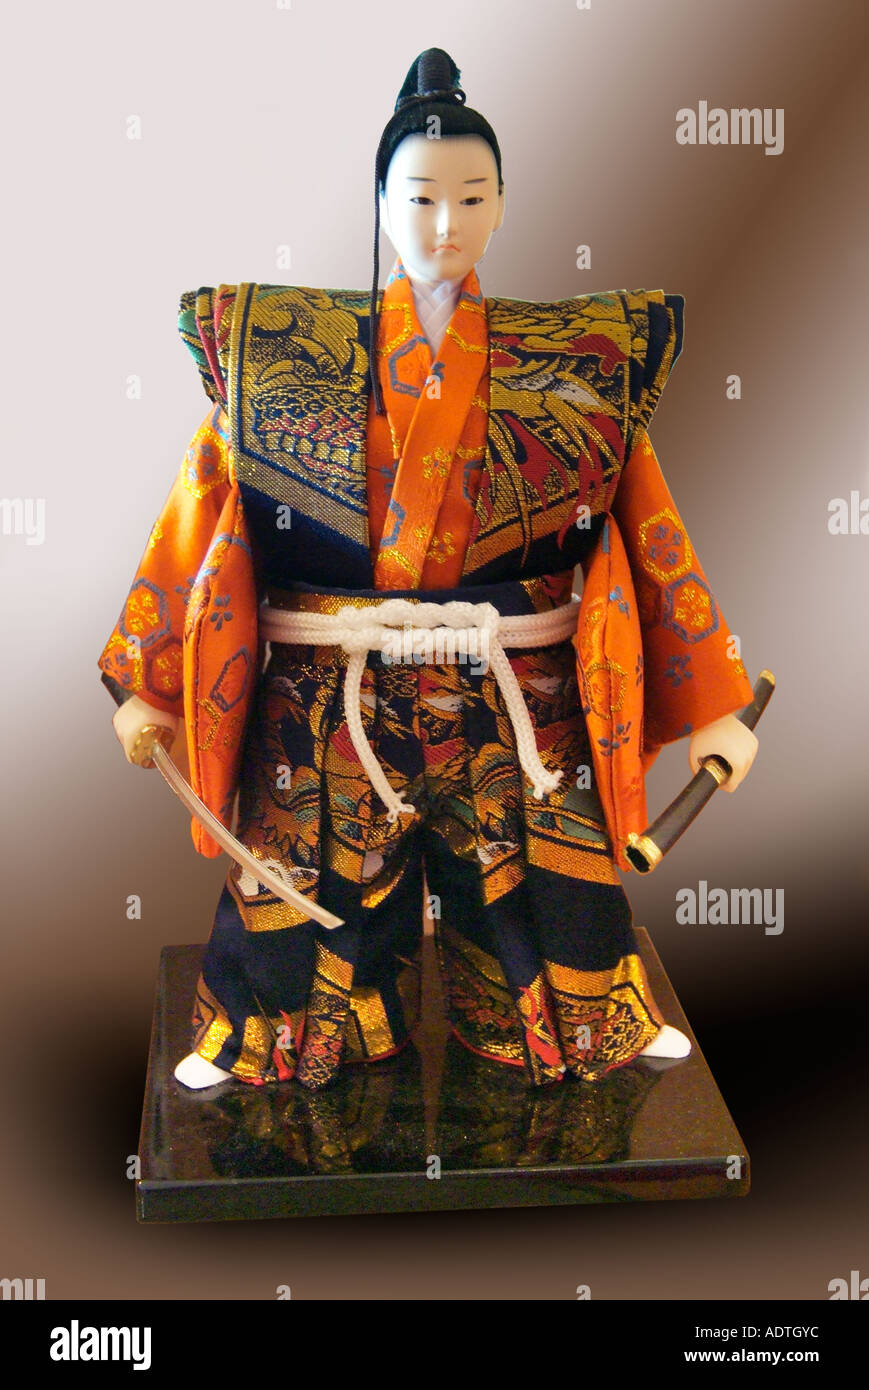 Male samurai Japan Japanese warrior soldier military noble orient oriental model traditional tradition shogun Asia Asian Stock Photo